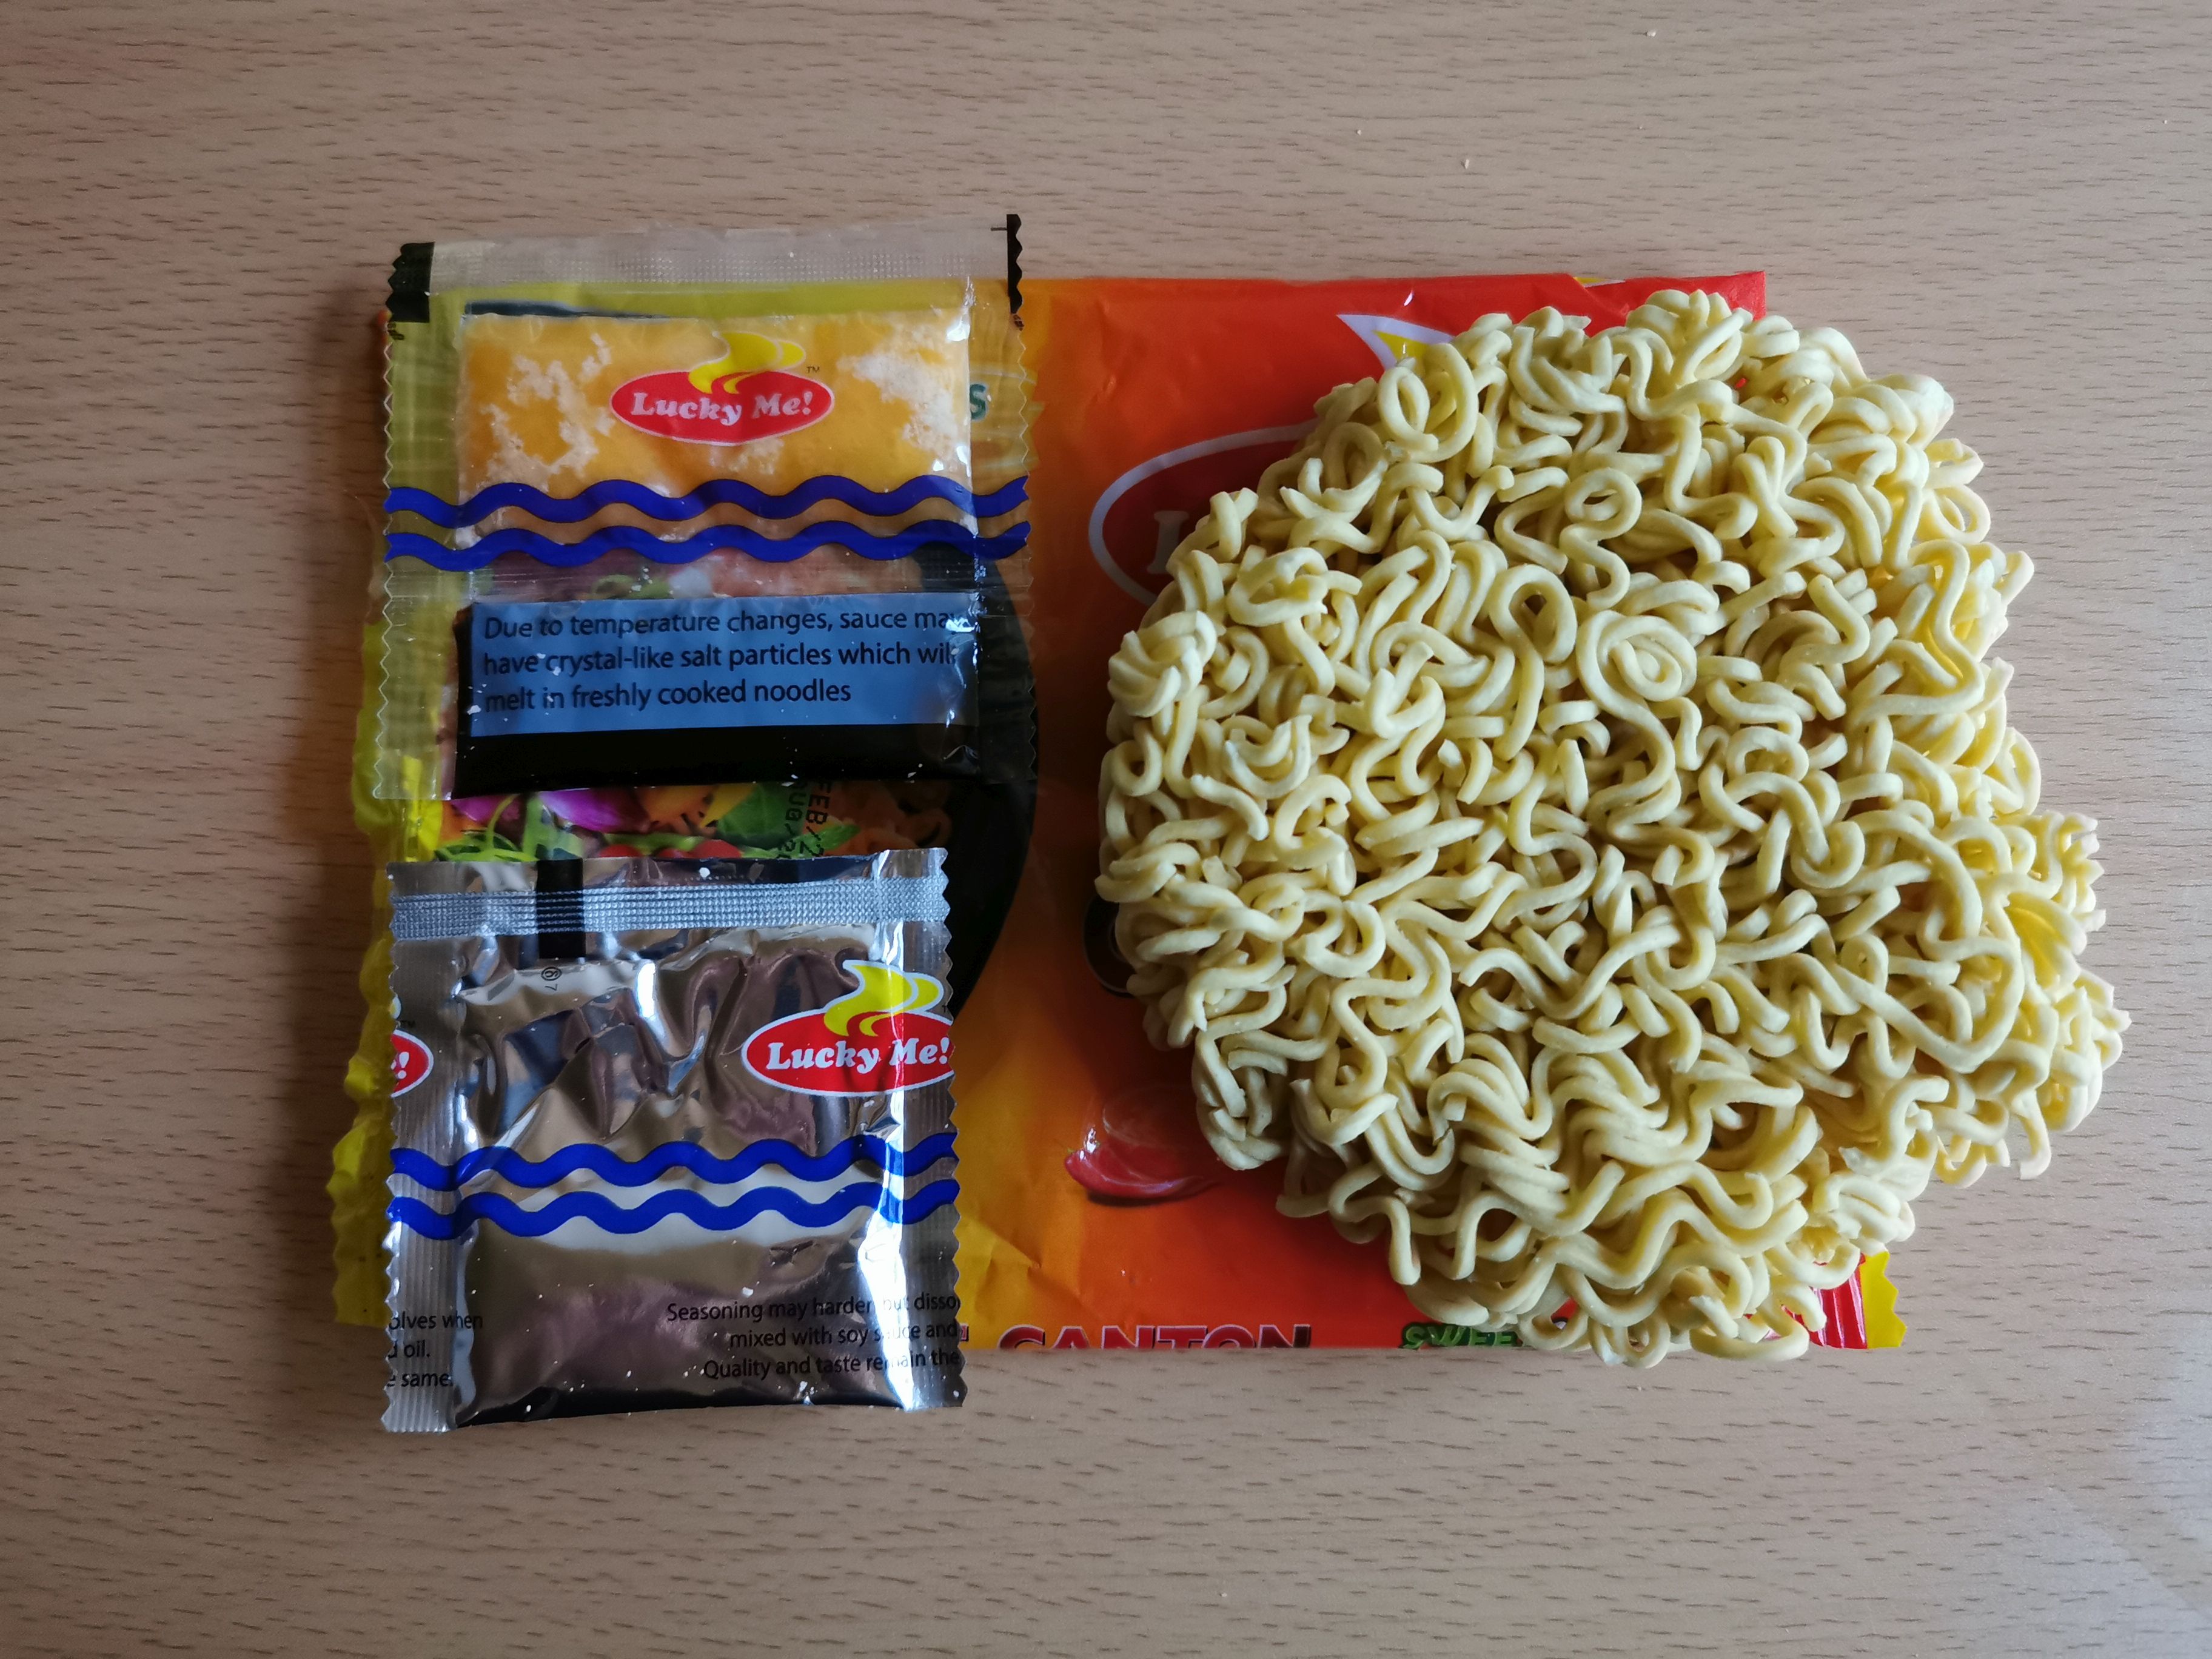 #2185: Lucky Me! "Instant Pancit Canton Sweet & Spicy Flavor" (2021)